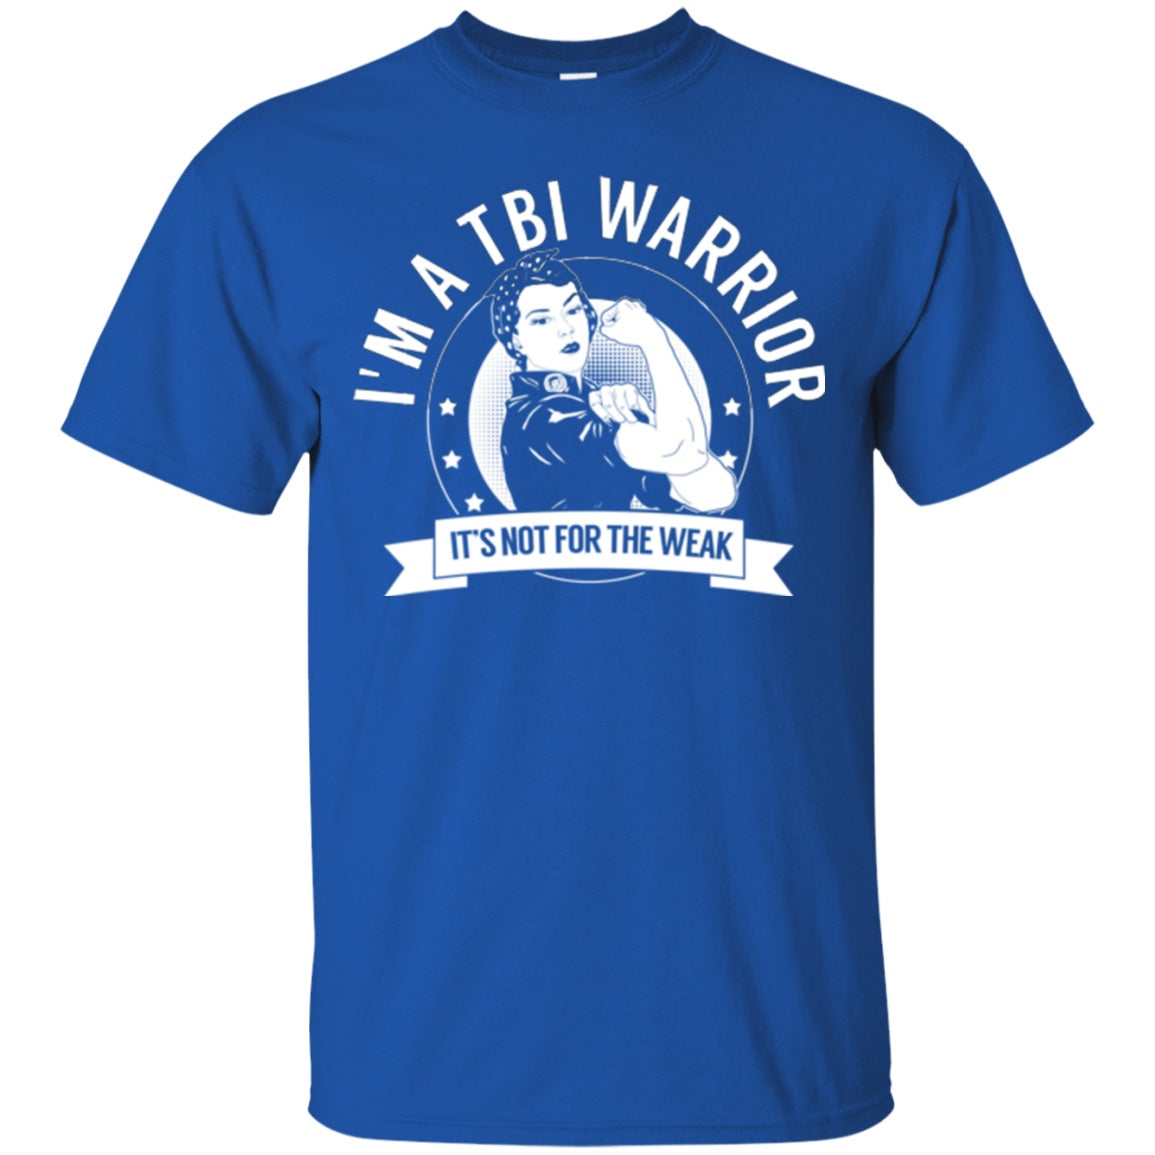 Traumatic Brain Injury - TBI Warrior Not For The Weak Cotton T-Shirt - The Unchargeables